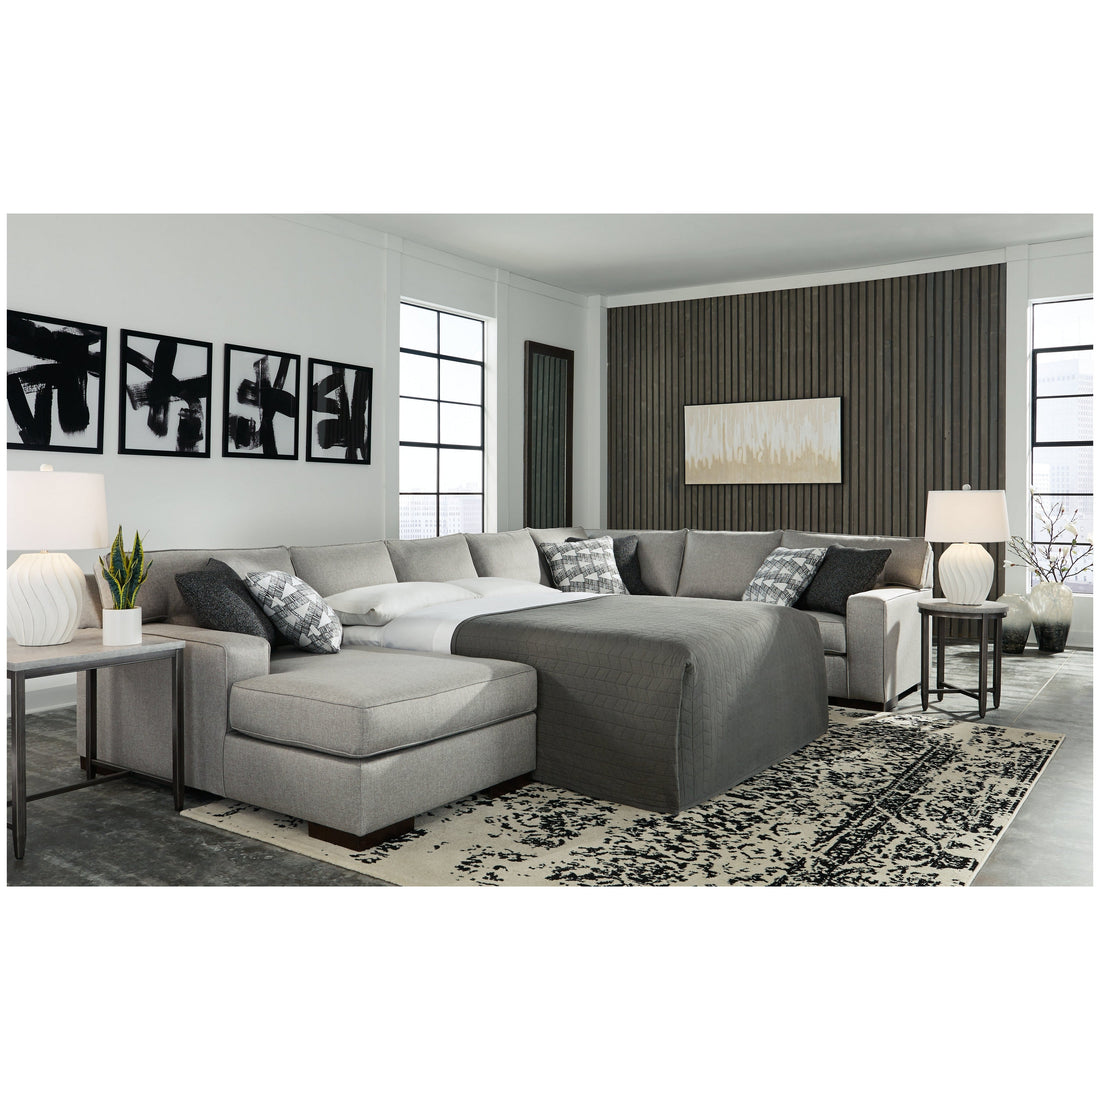 Marsing Nuvella 5-Piece Sleeper Sectional with Chaise Ash-41902S11